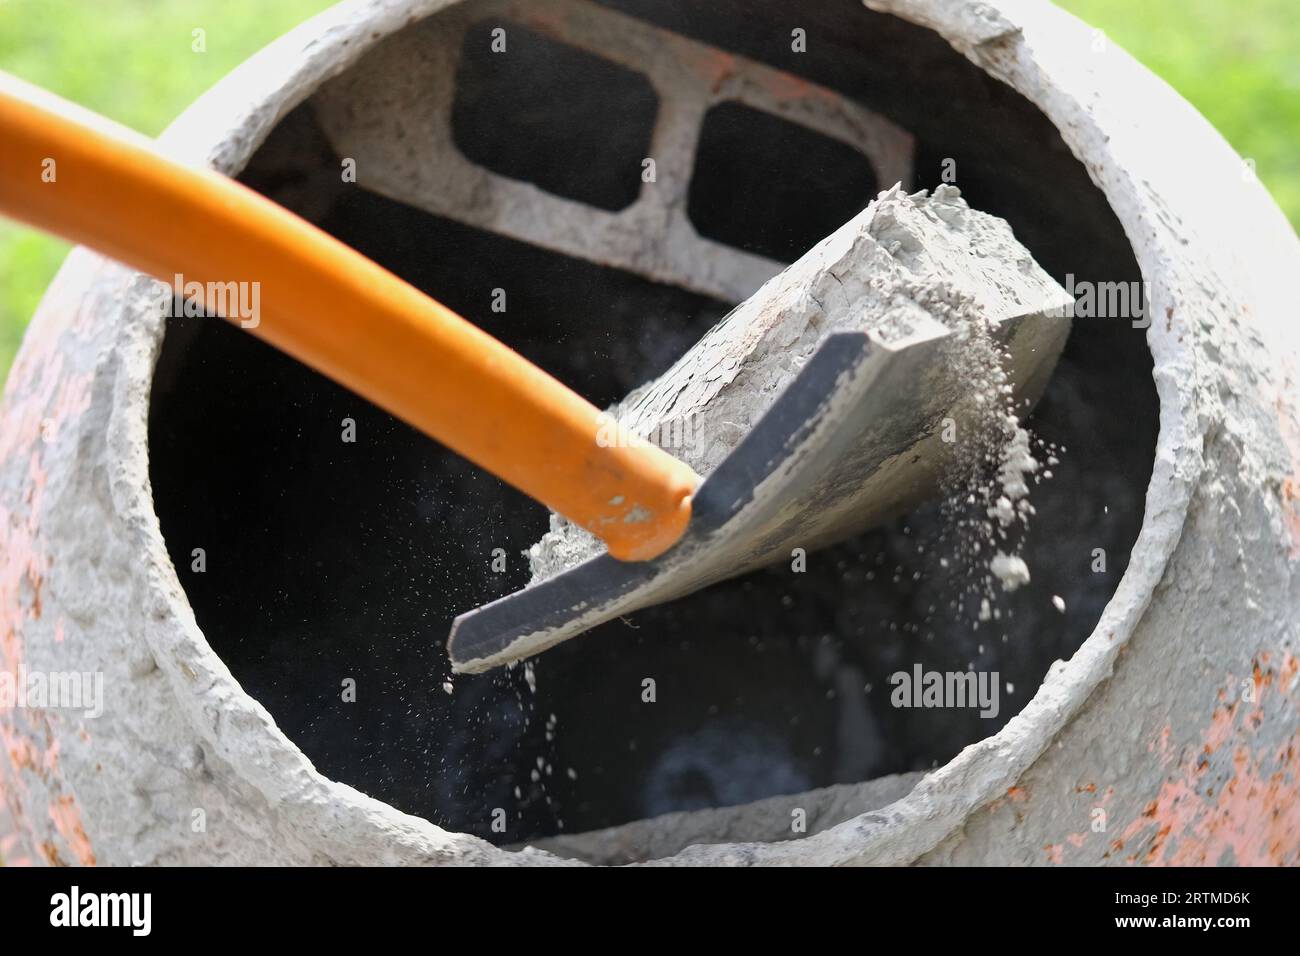 Bucket cement mix with on construction site the ingredients. Brick, Stone,  Mortar, Sand Stock Photo - Alamy